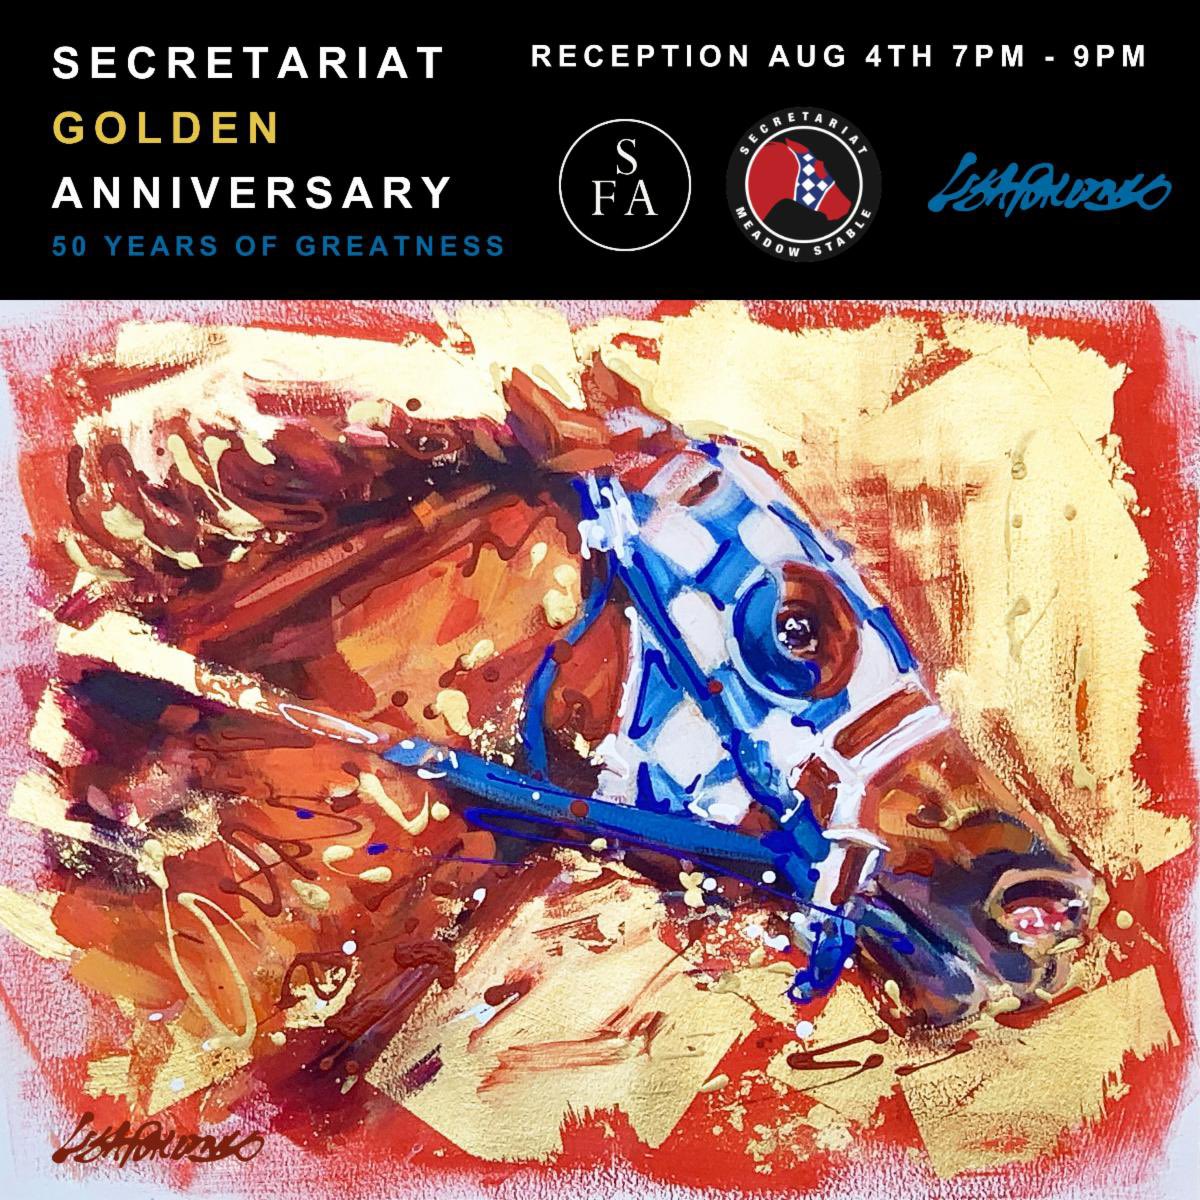 More activities honoring #Secretariat : On Friday, Whitney eve in Saratoga, Reception for Lisa Palombo at her Secretariat Golden Anniversary exhibit opening at the Spa Fine Art Gallery on Broadway. @SECRETARIATofcl 🐎 💙🤍🎪